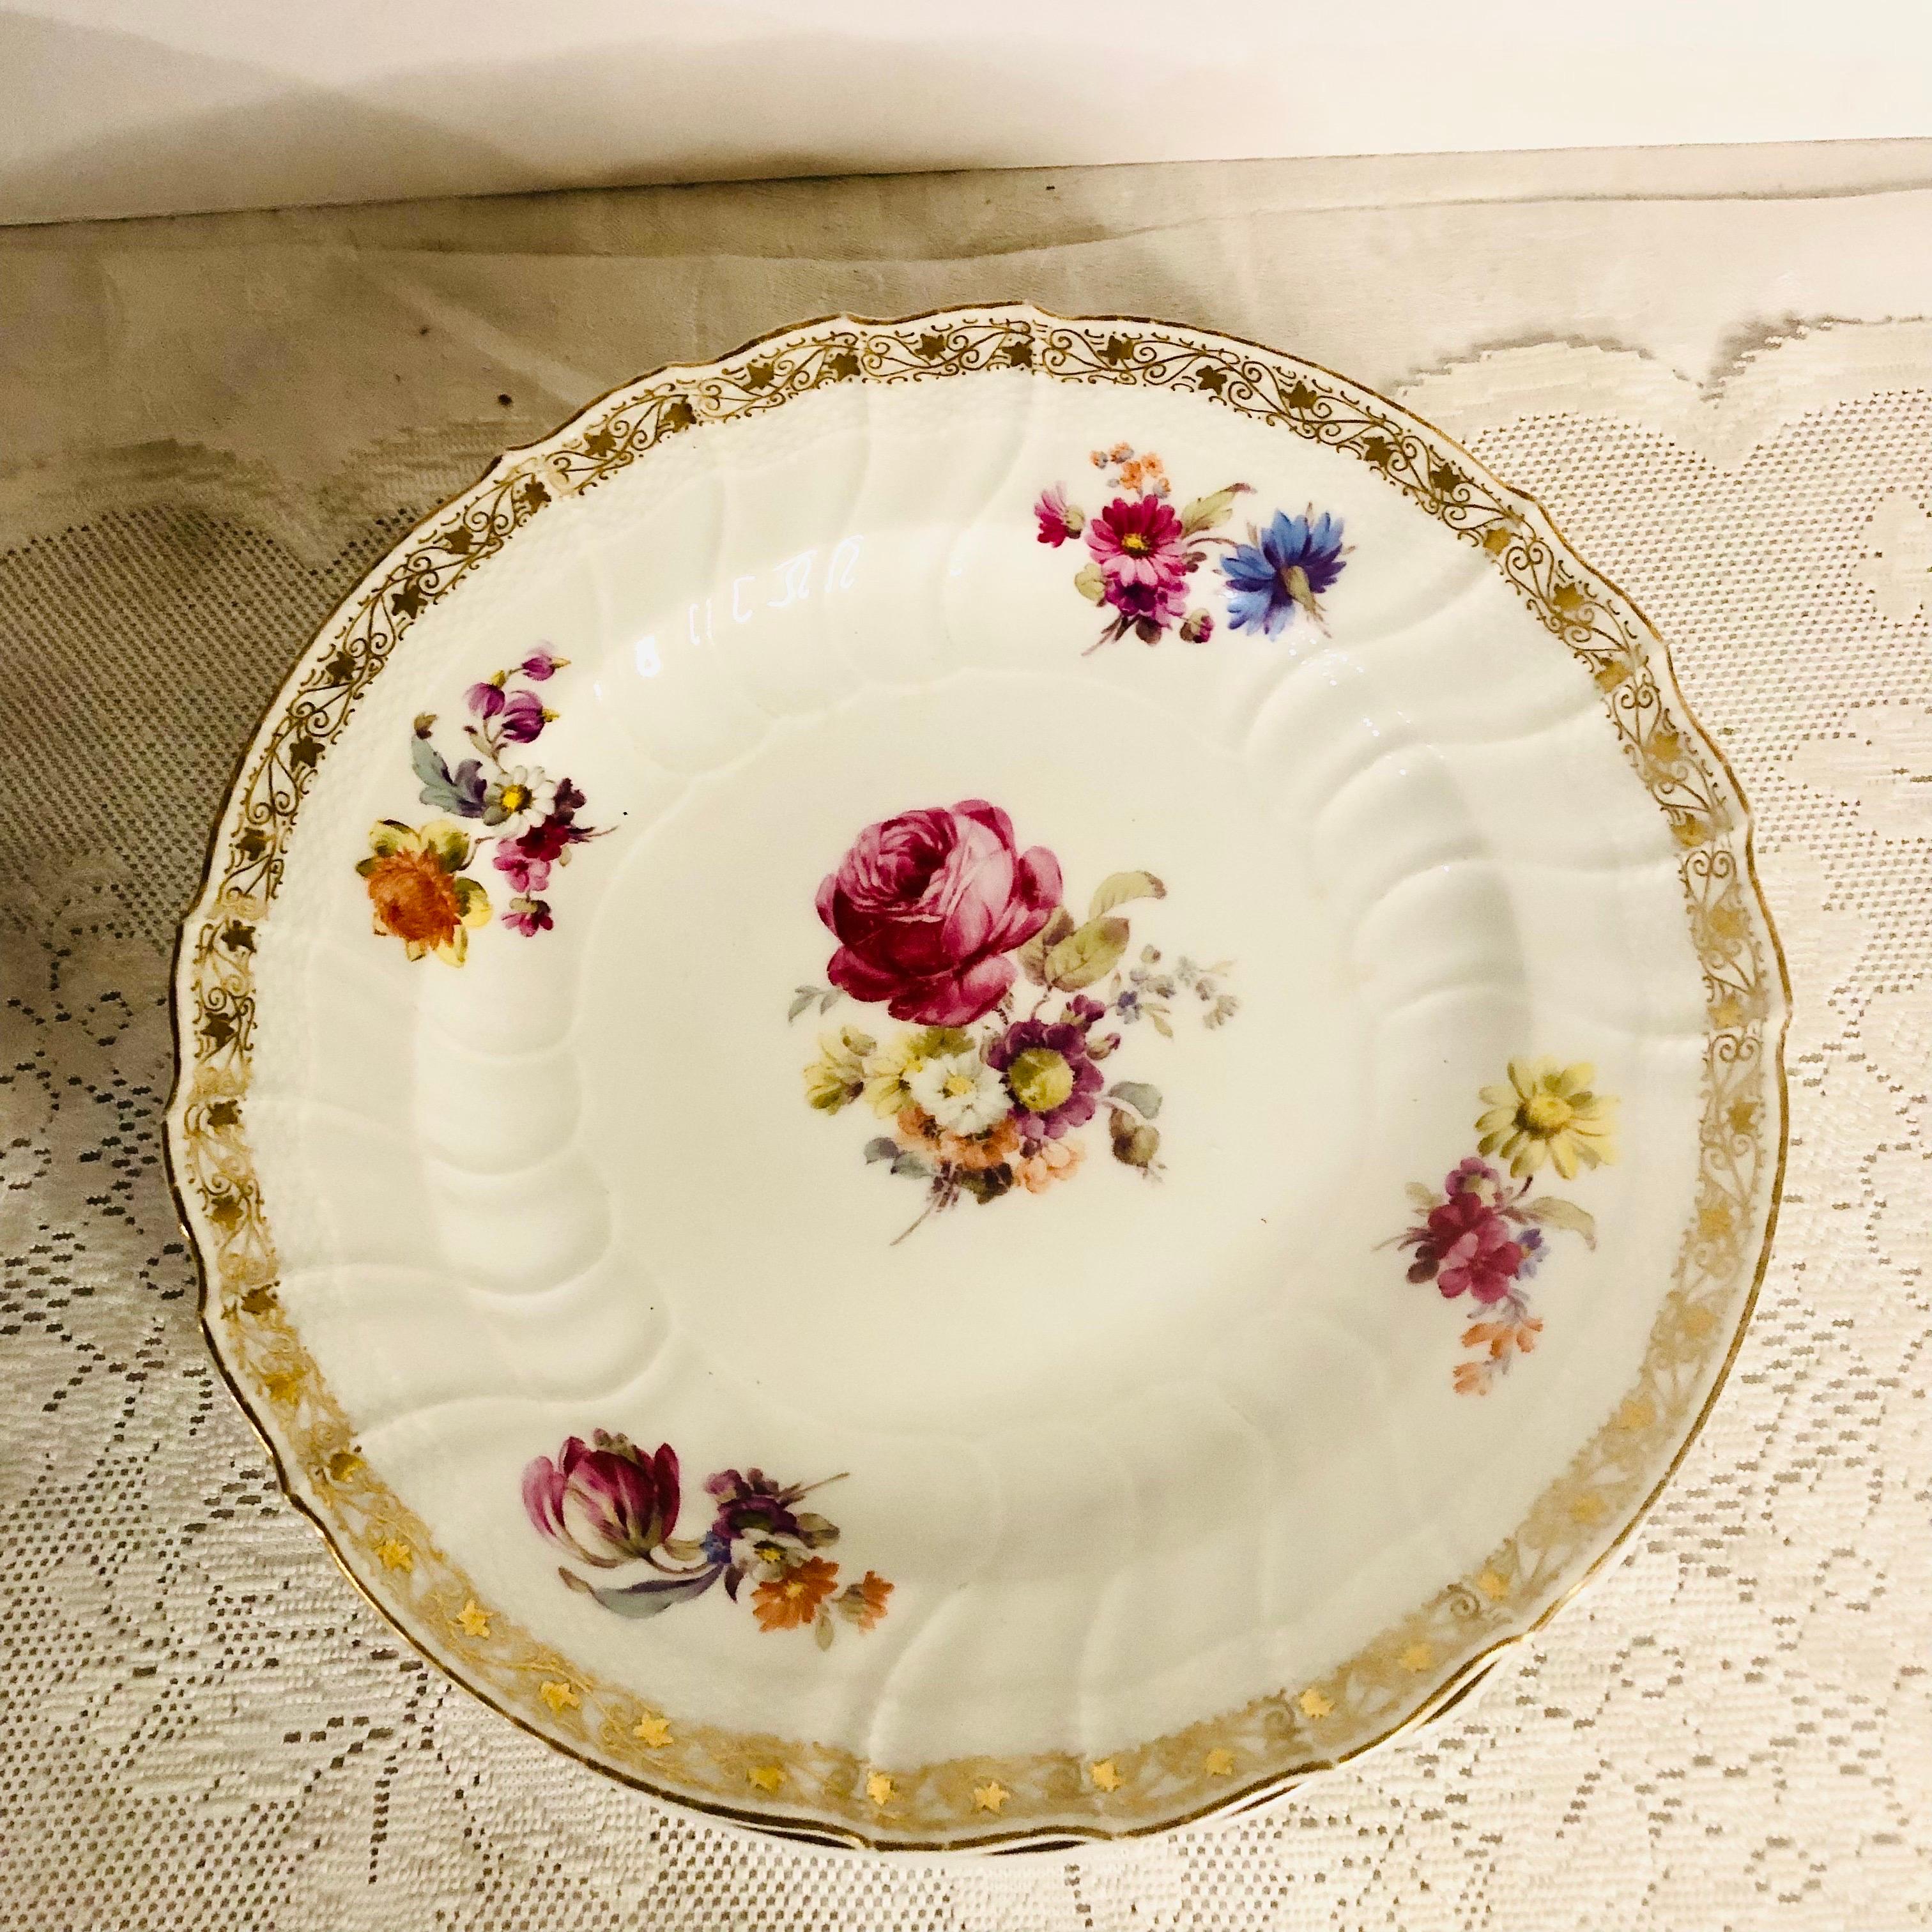 12 KPM Dinner Plates, Each Hand-Painted with a Different Central Flower Bouquet For Sale 1